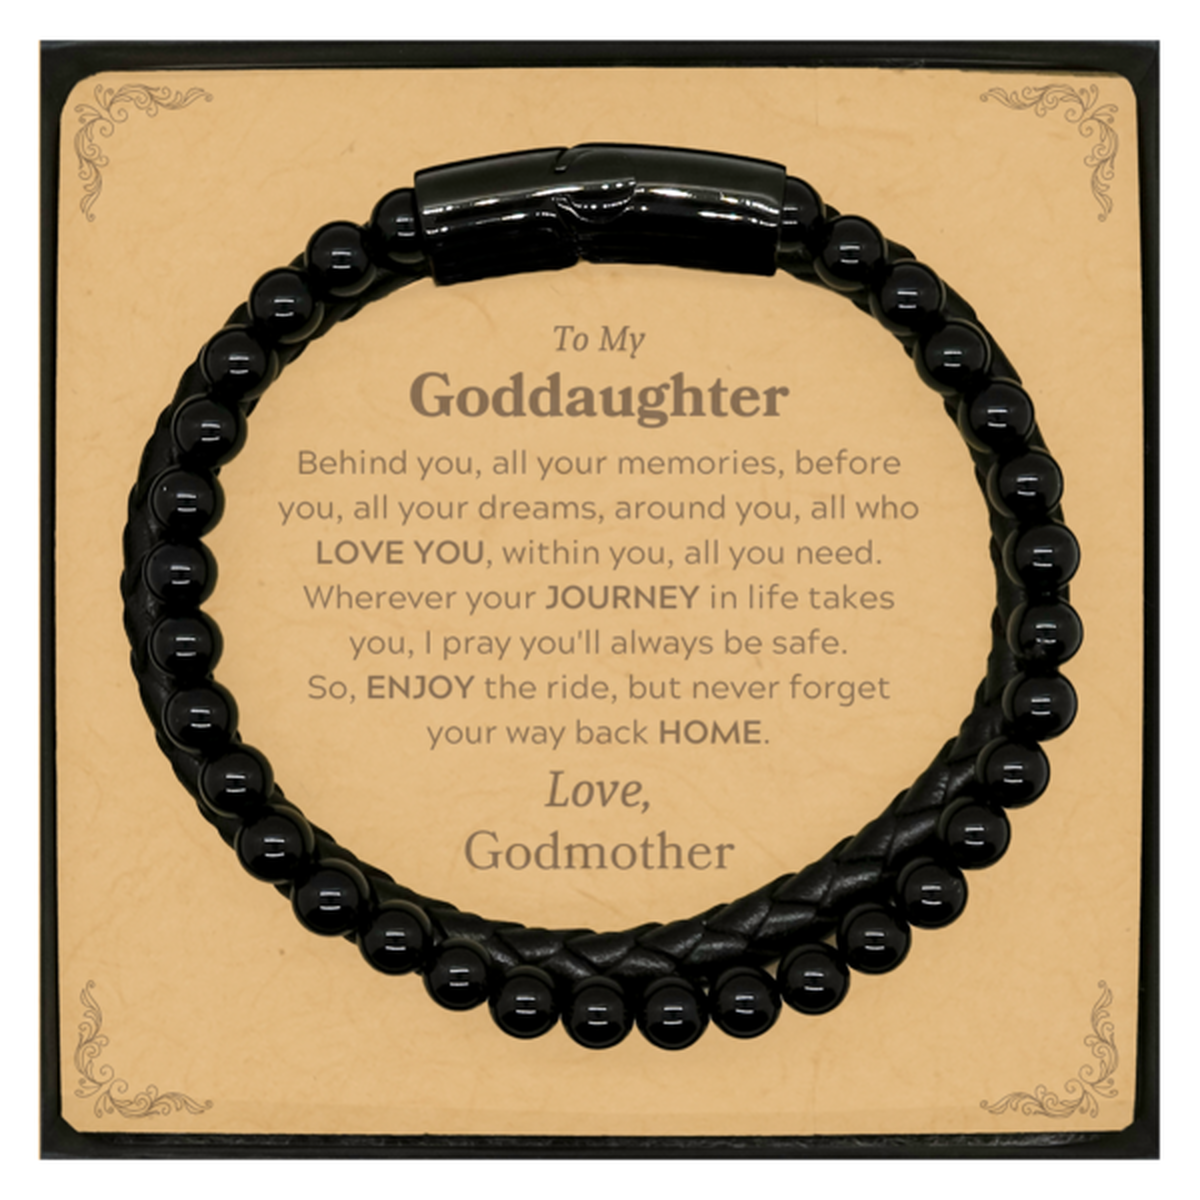 To My Goddaughter Graduation Gifts from Godmother, Goddaughter Stone Leather Bracelets Christmas Birthday Gifts for Goddaughter Behind you, all your memories, before you, all your dreams. Love, Godmother